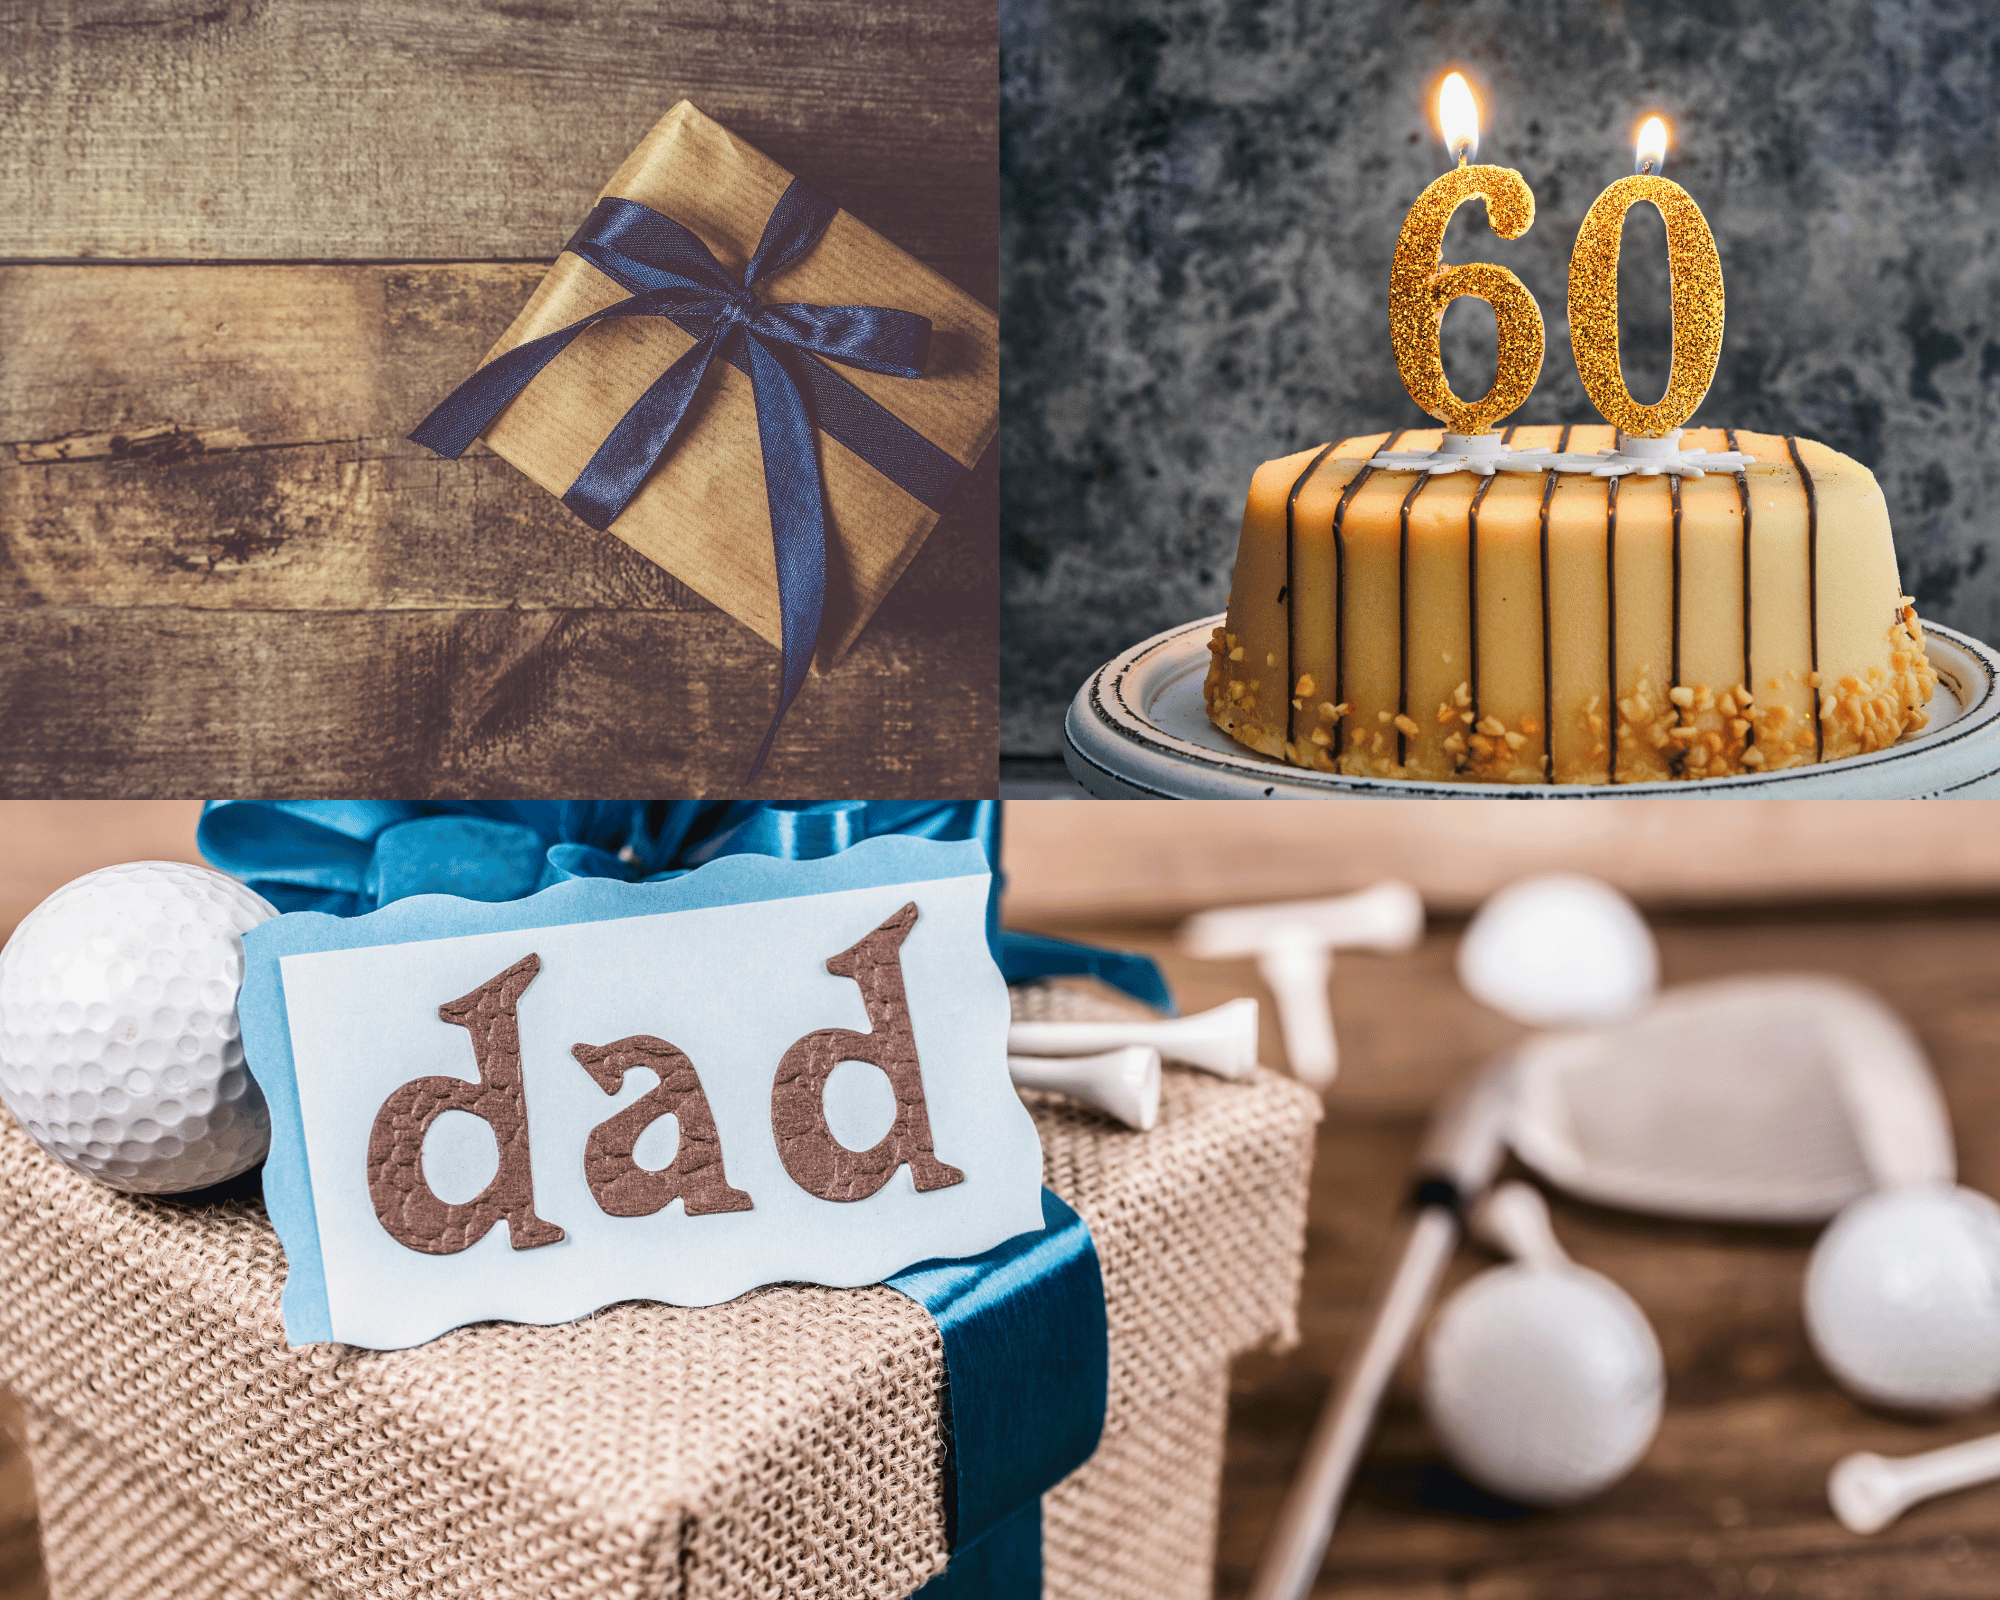 60th Birthday Experience Gifts Ideas for Dad